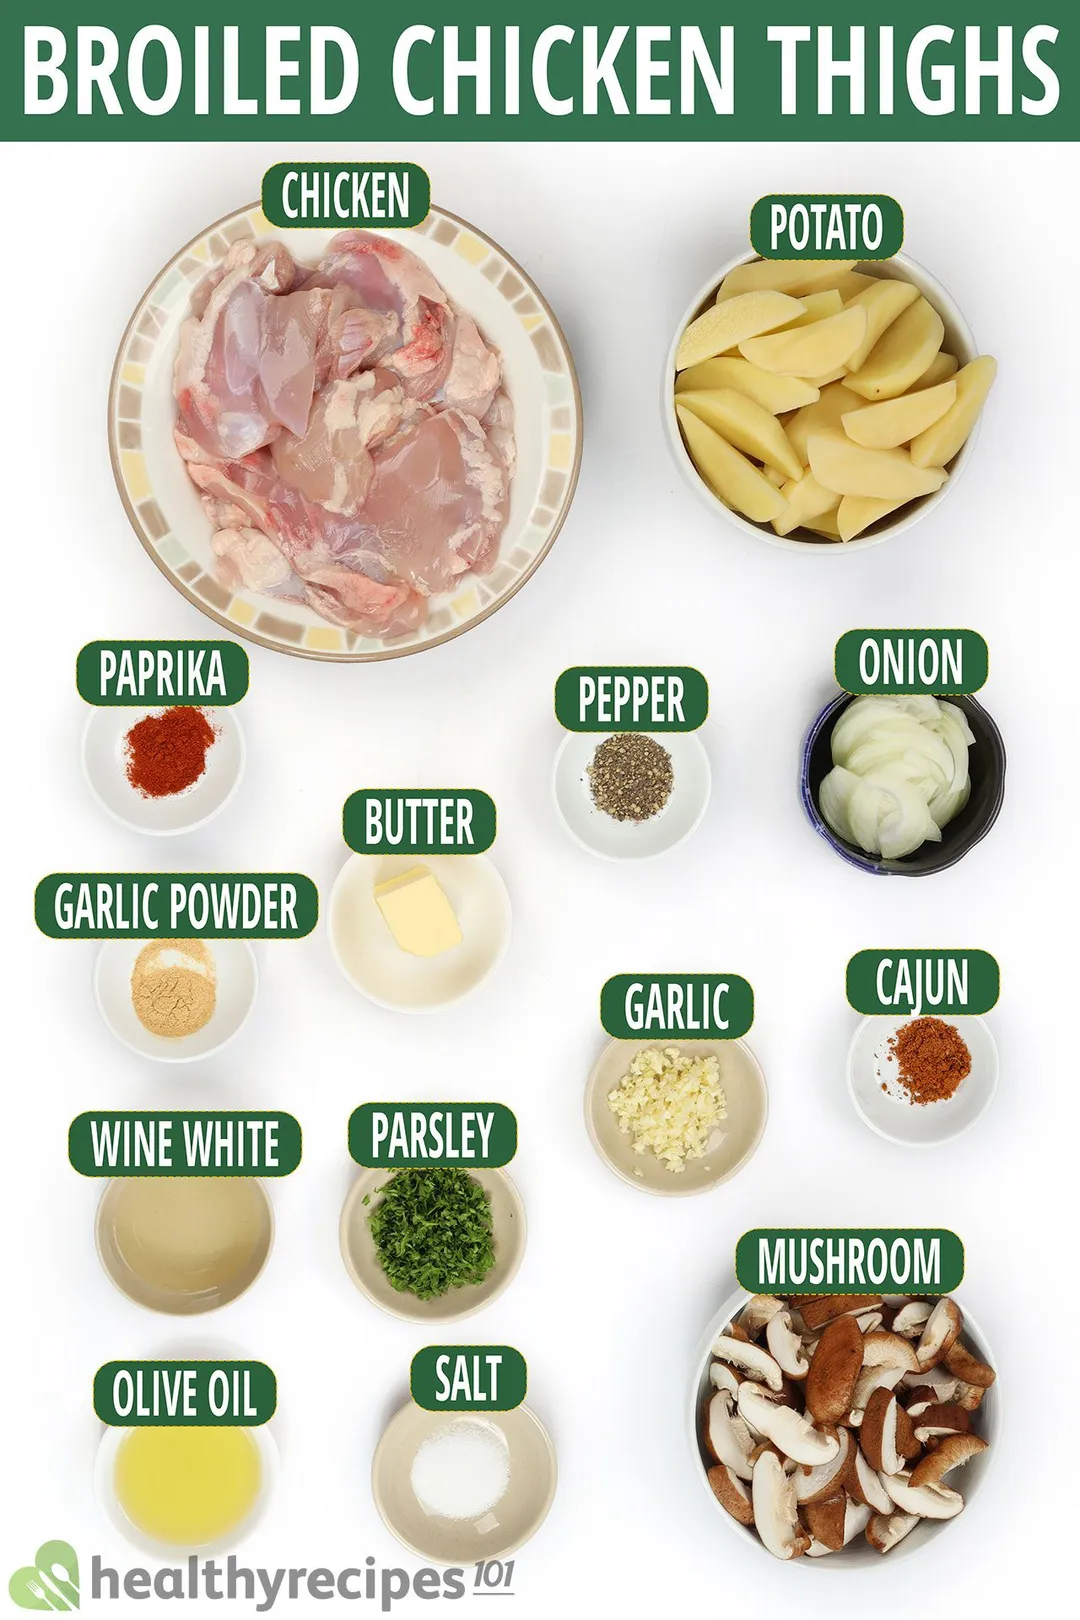 ingredients list for broiled chicken thighs